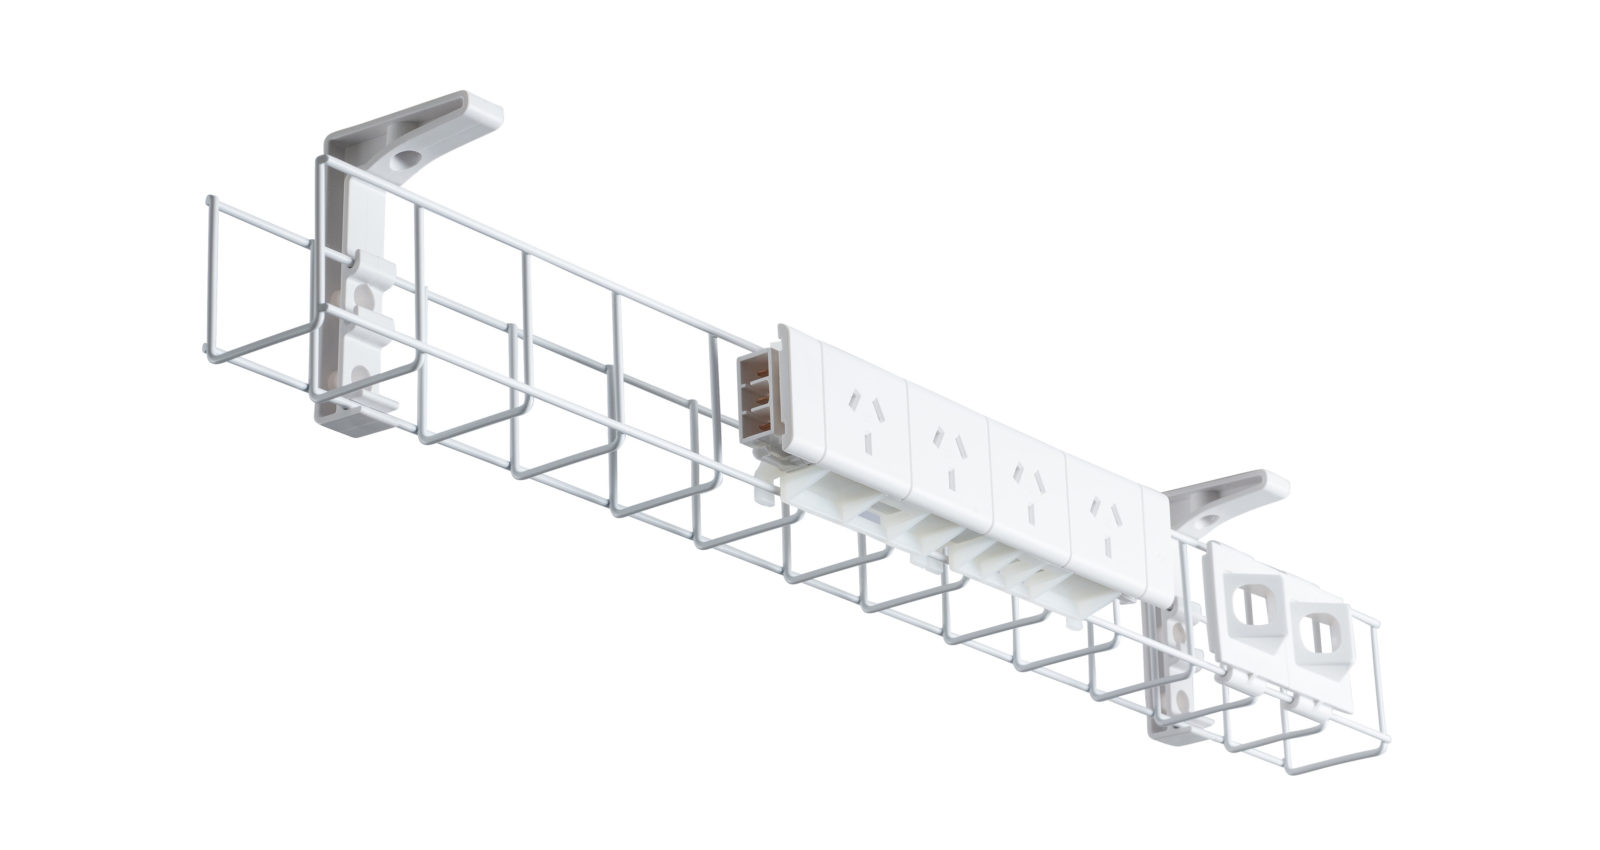 Vertilift 3-Leg Electric Corner Frame Wire Grid Cable Trays